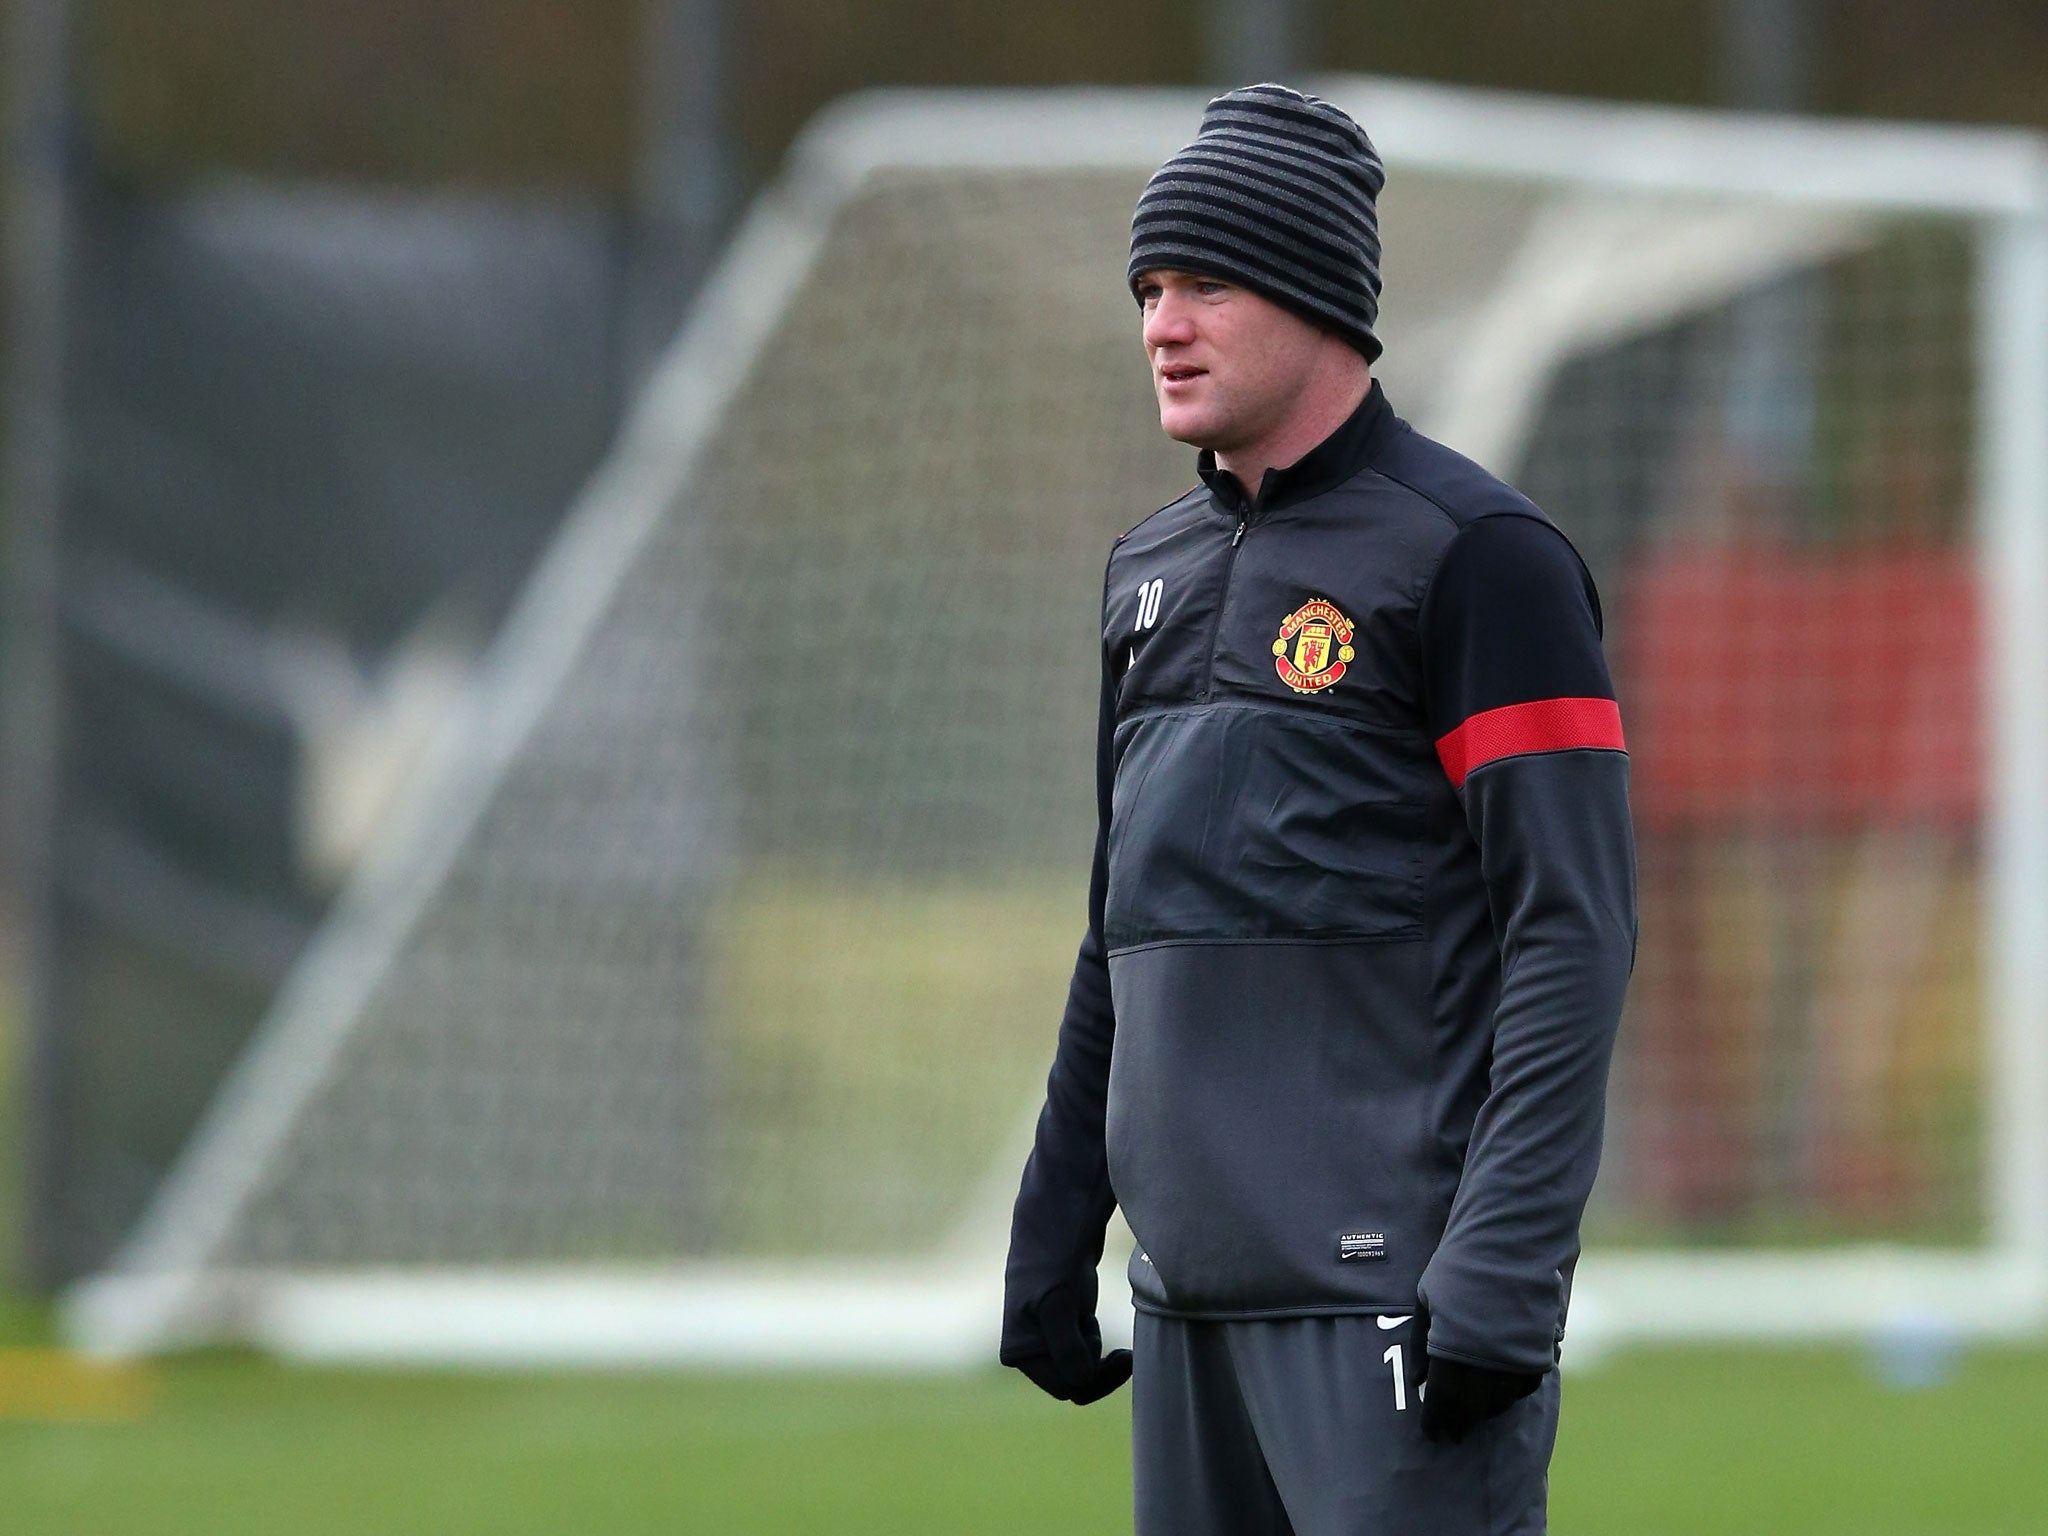 Sir Alex Ferguson has said Wayne Rooney’s “frame” means that he is affected more than other players by time out of team